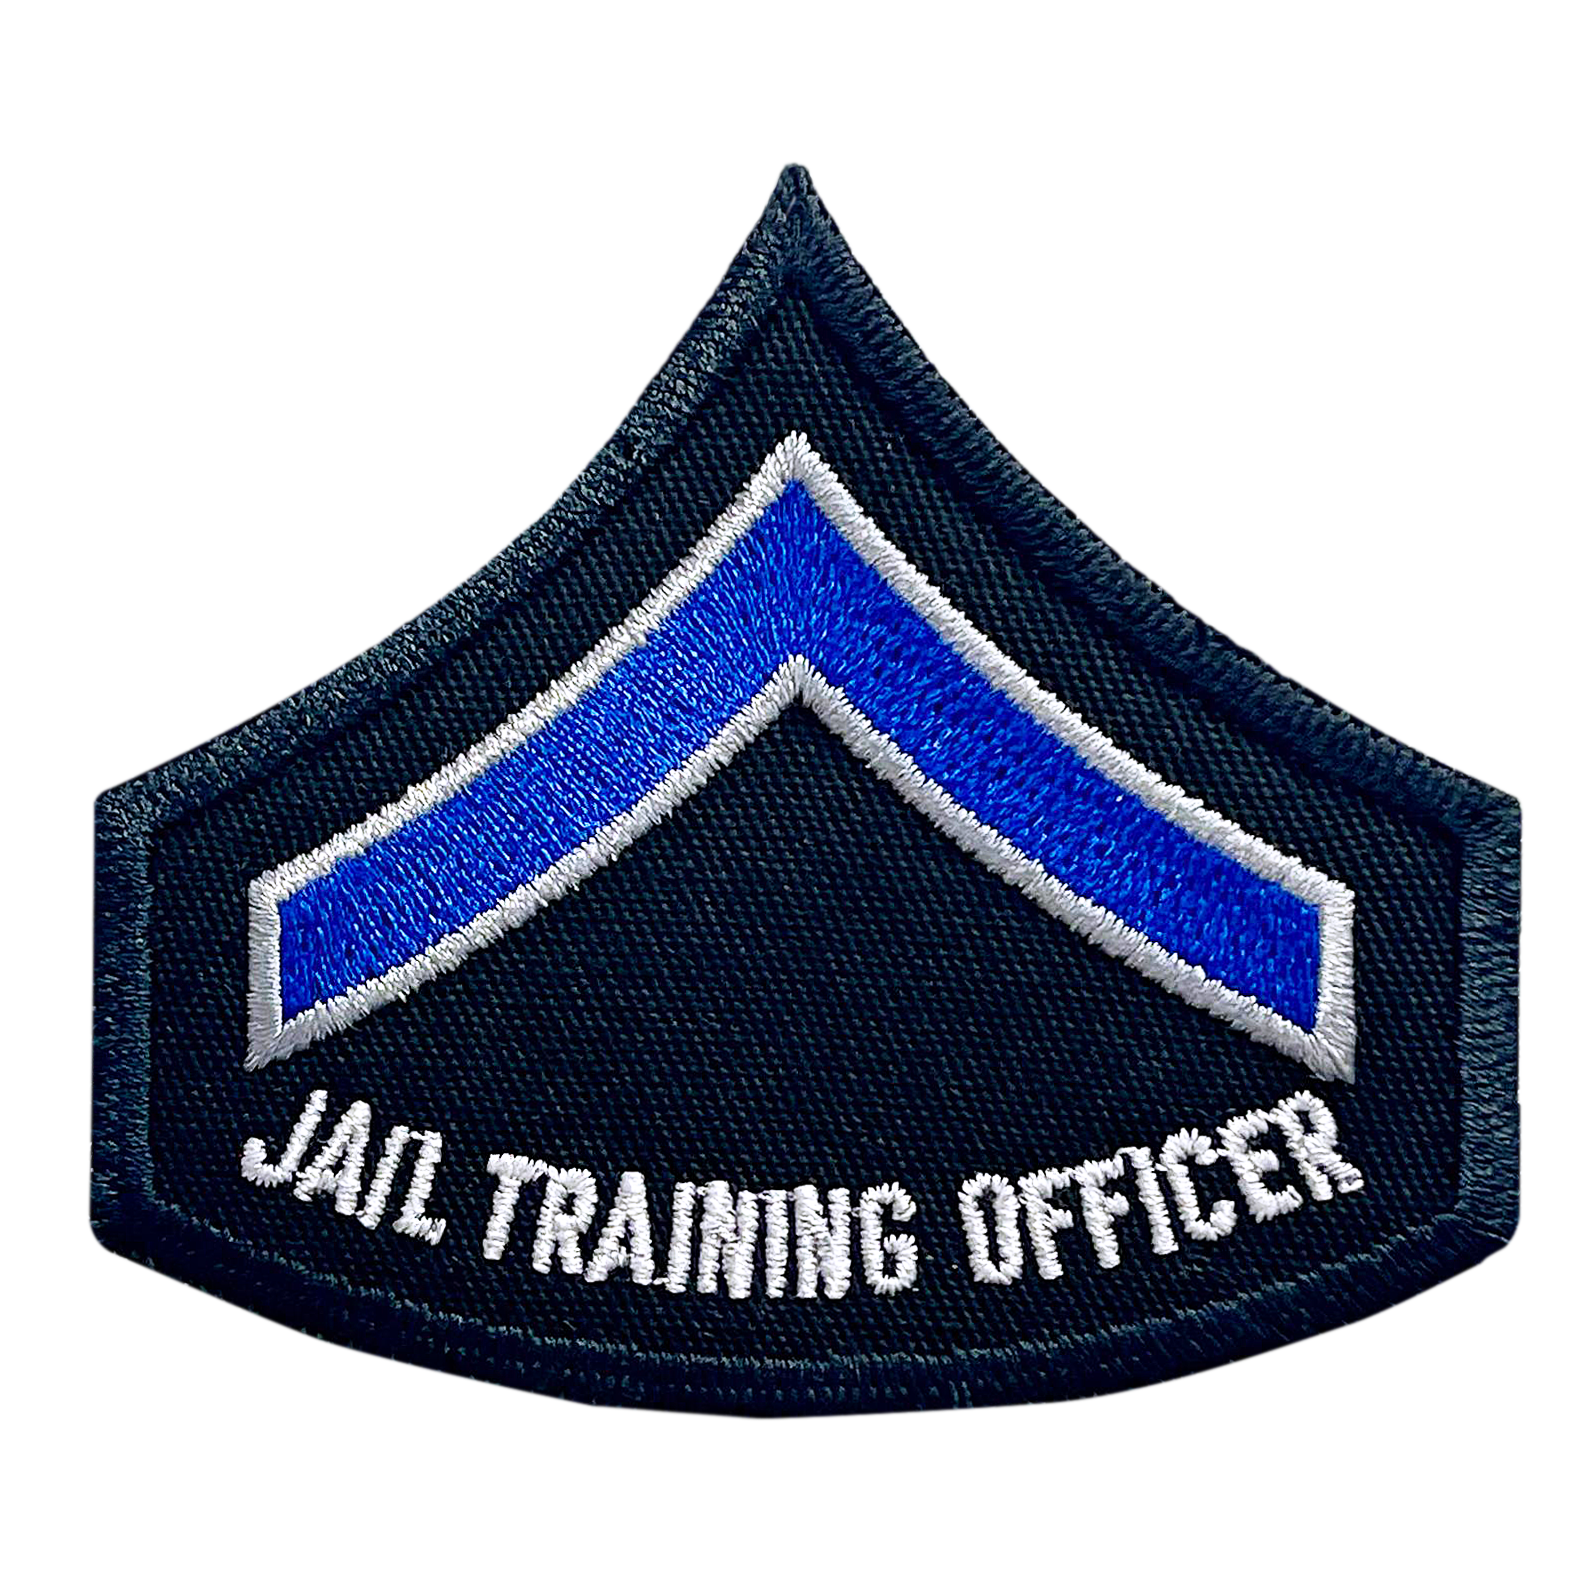 Jail Training Officer Patch